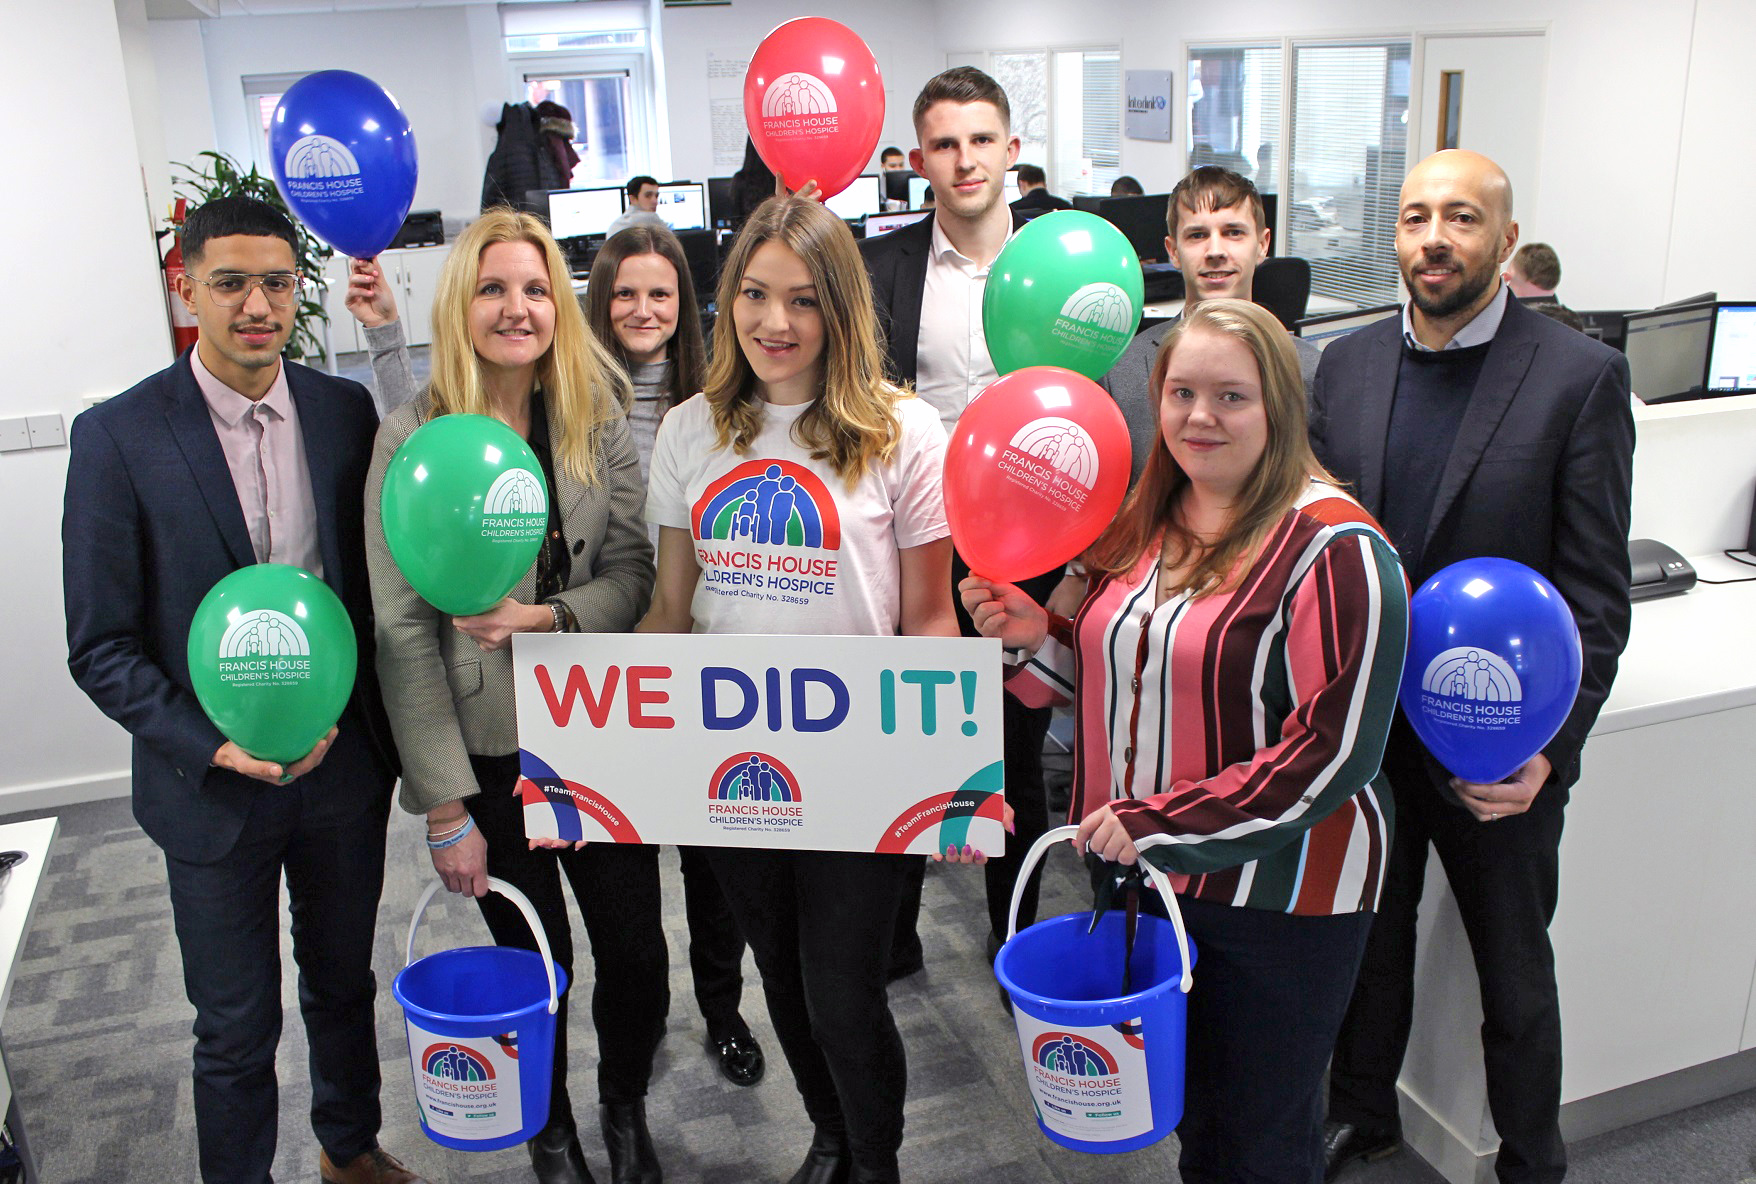 Staff with charity buckets and balloons